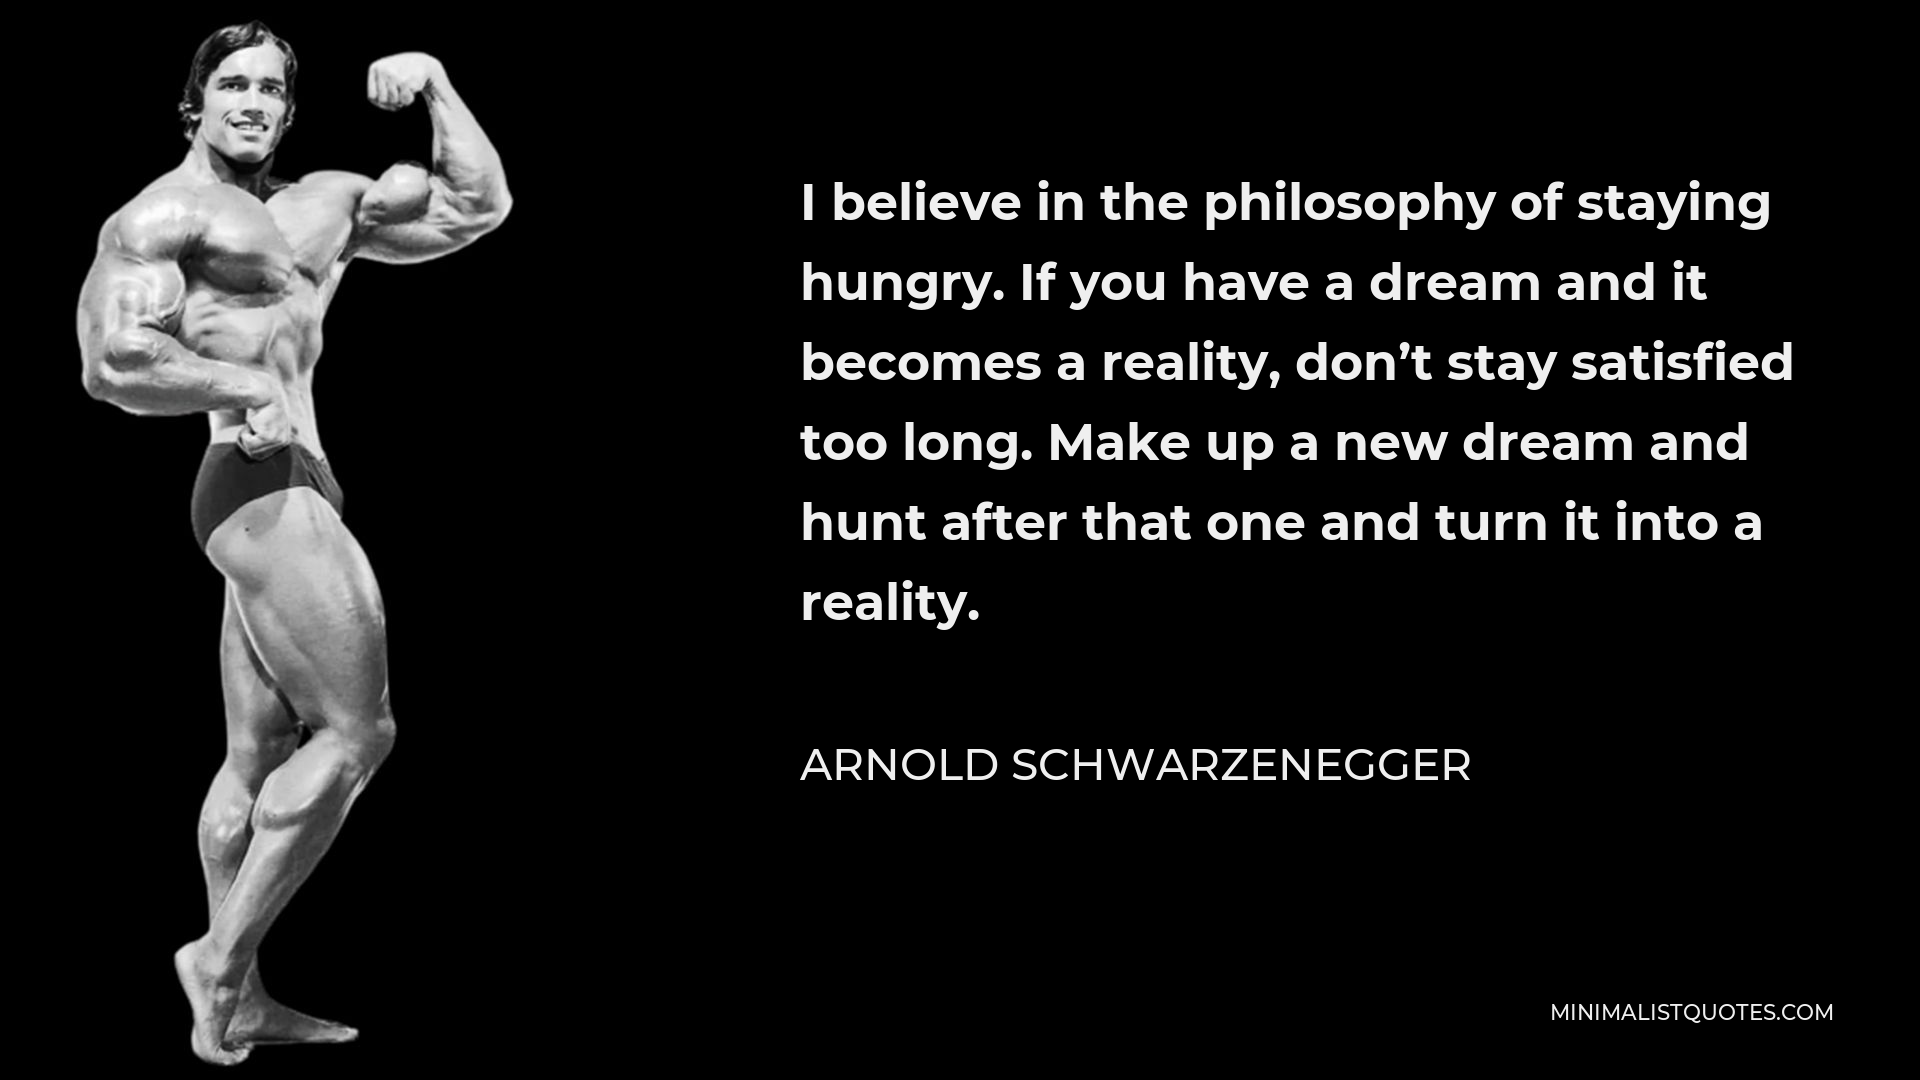 Arnold Schwarzenegger Quote - I believe in the philosophy of staying hungry. If you have a dream and it becomes a reality, don’t stay satisfied too long. Make up a new dream and hunt after that one and turn it into a reality.